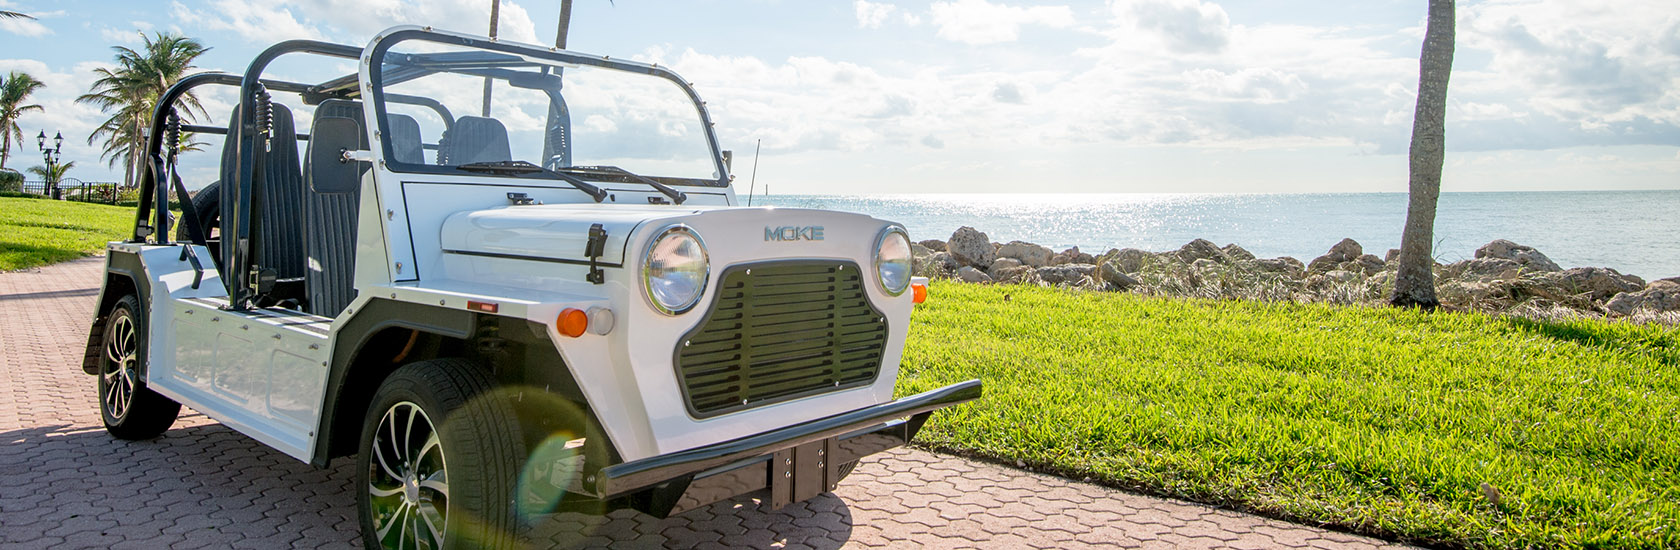 Moke vehicle with ocean in the background